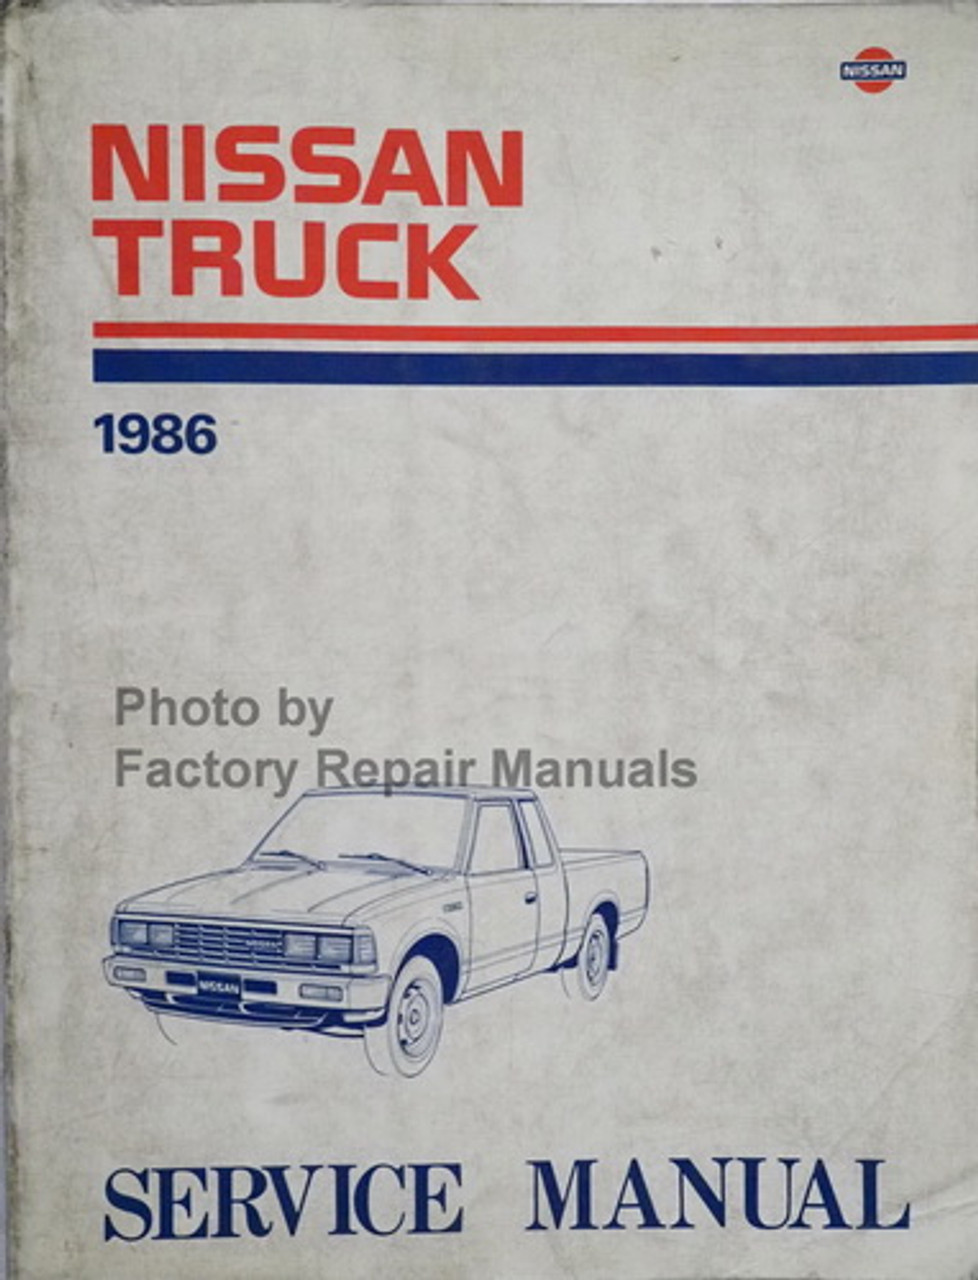 86 1986 Nissan Truck owners manual 